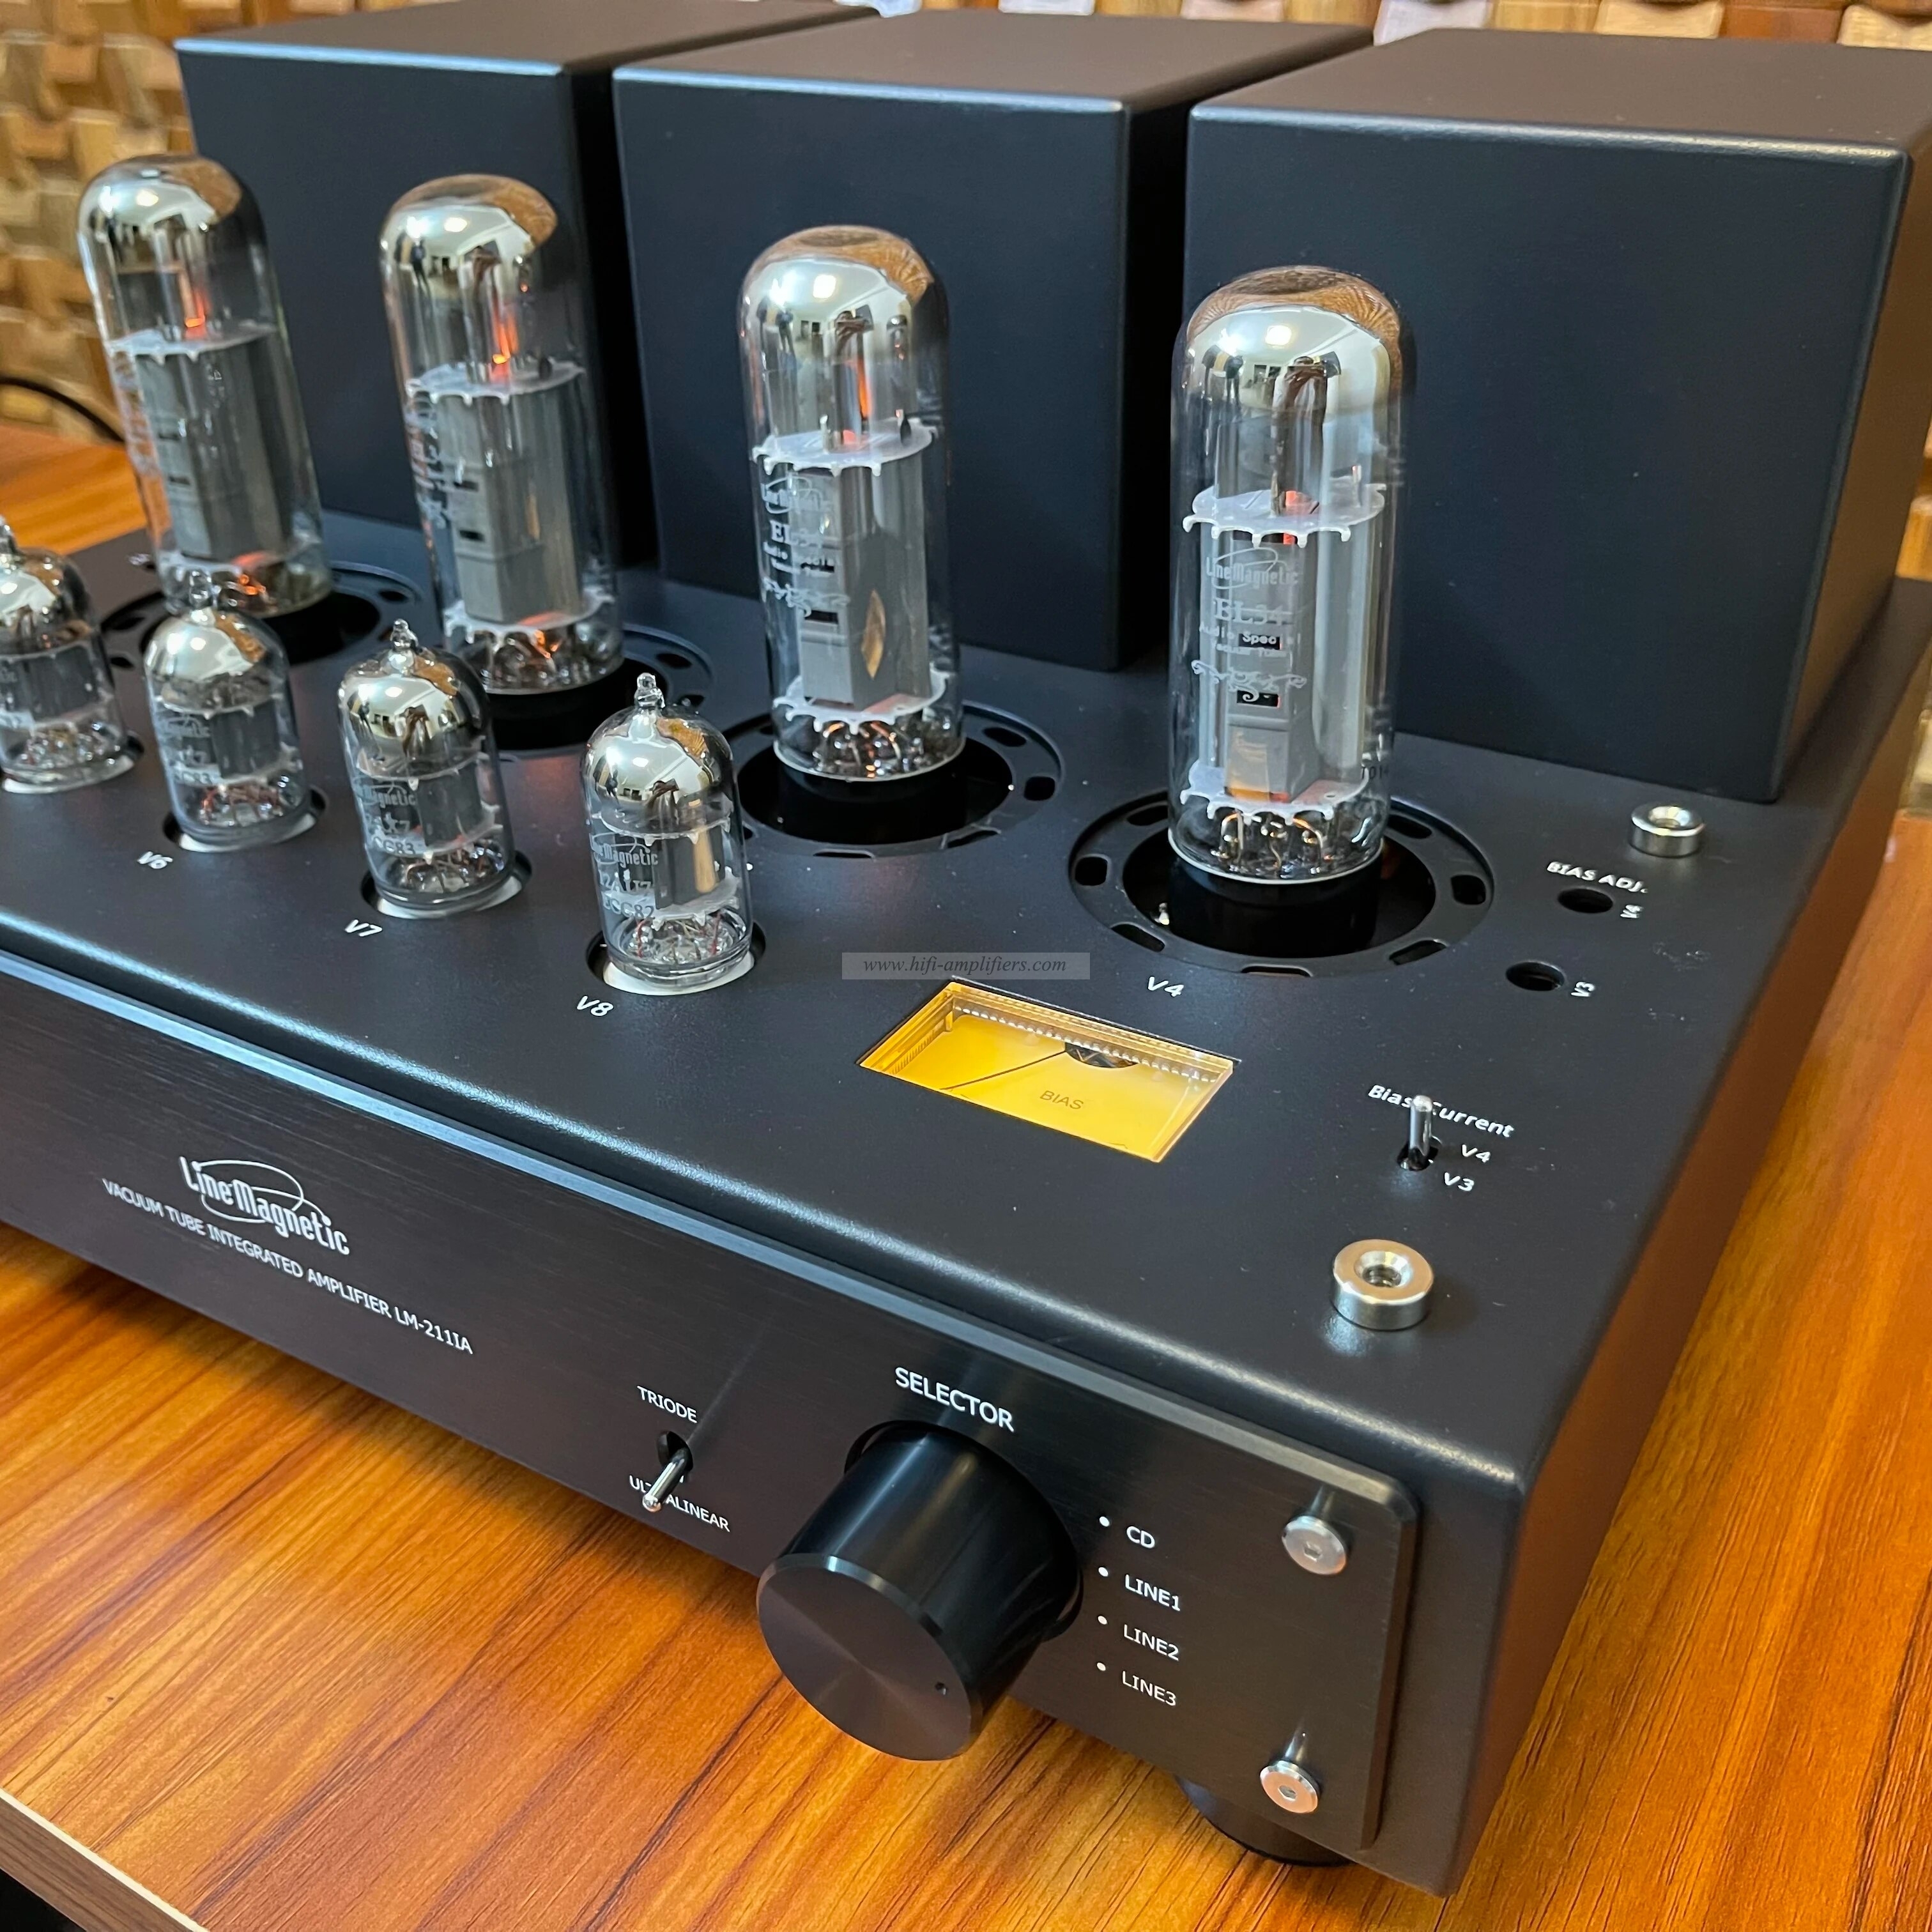 Line Magnetic LM-211IA El34*4 Integrated Tube Amplifier Push-pull Amplifier 32W*2